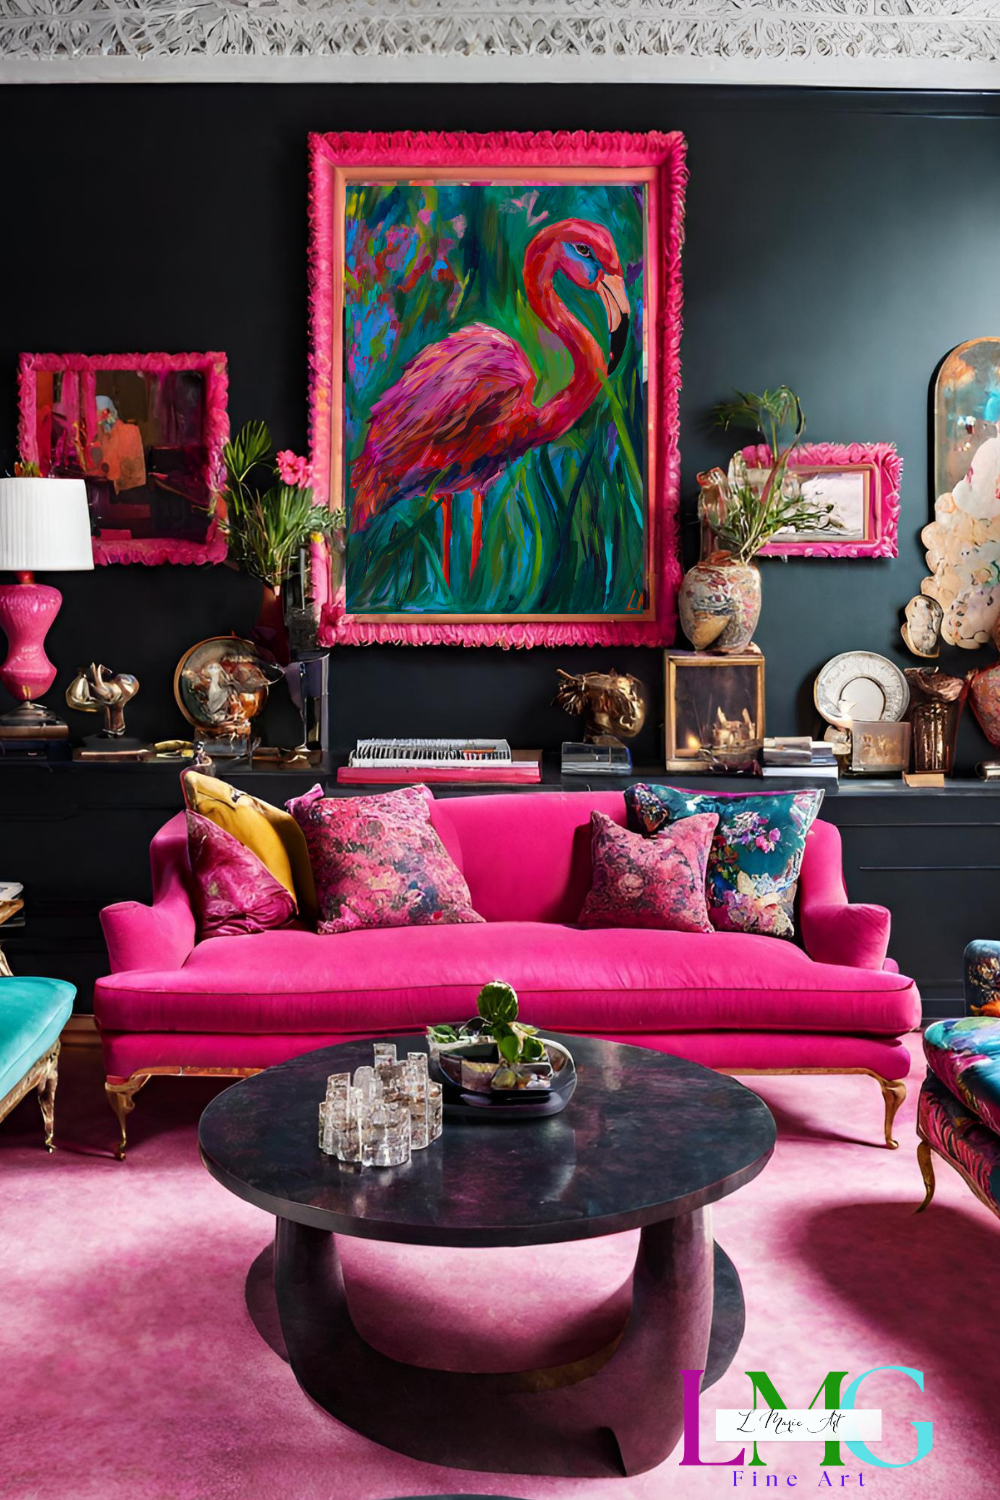 Original And Bold Eclectic House Embracing Diversity in Home Decor with Eclectic Style that Stands Out